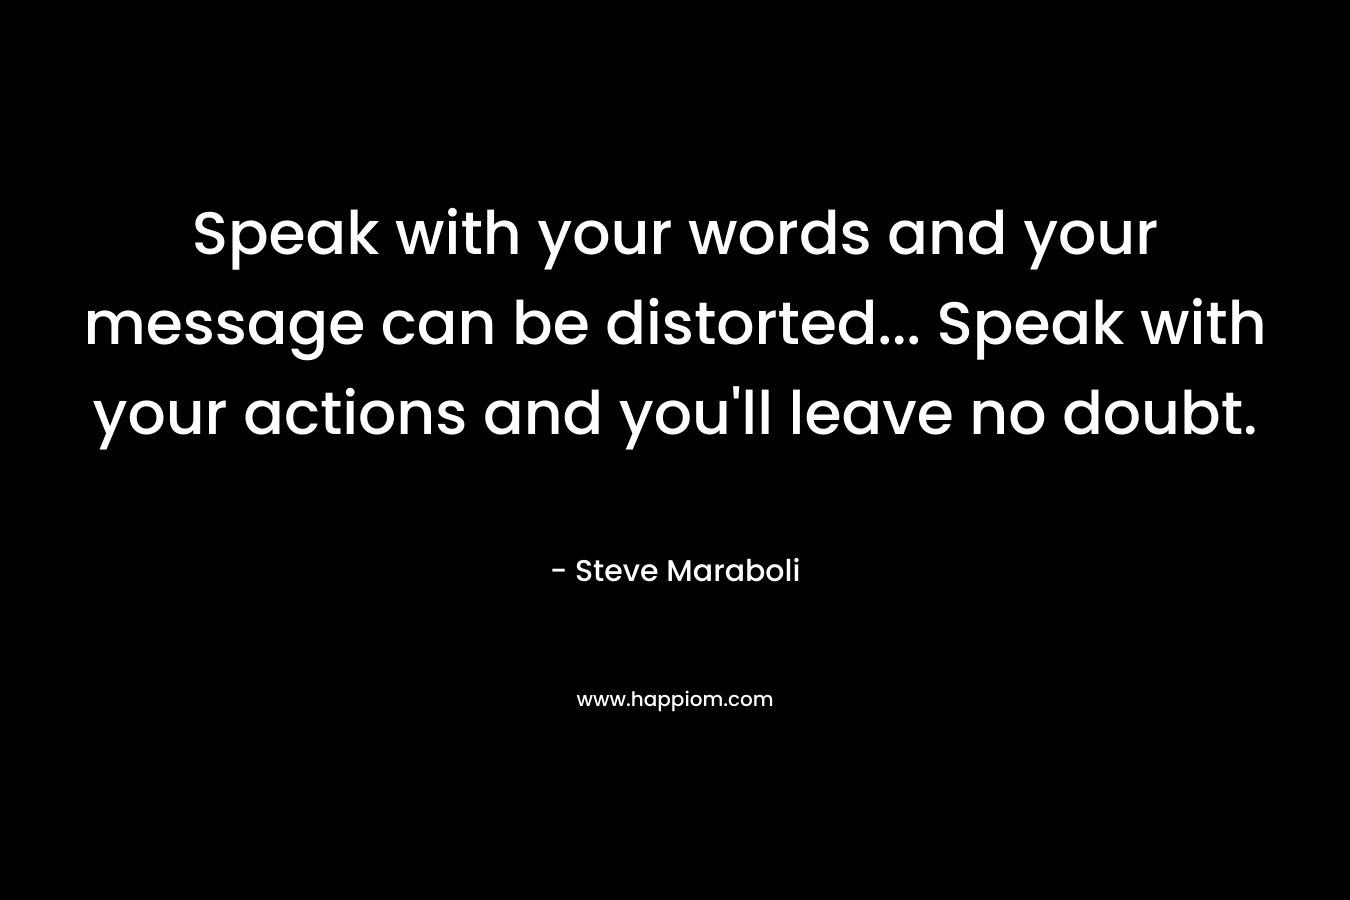 Speak with your words and your message can be distorted… Speak with your actions and you’ll leave no doubt. – Steve Maraboli